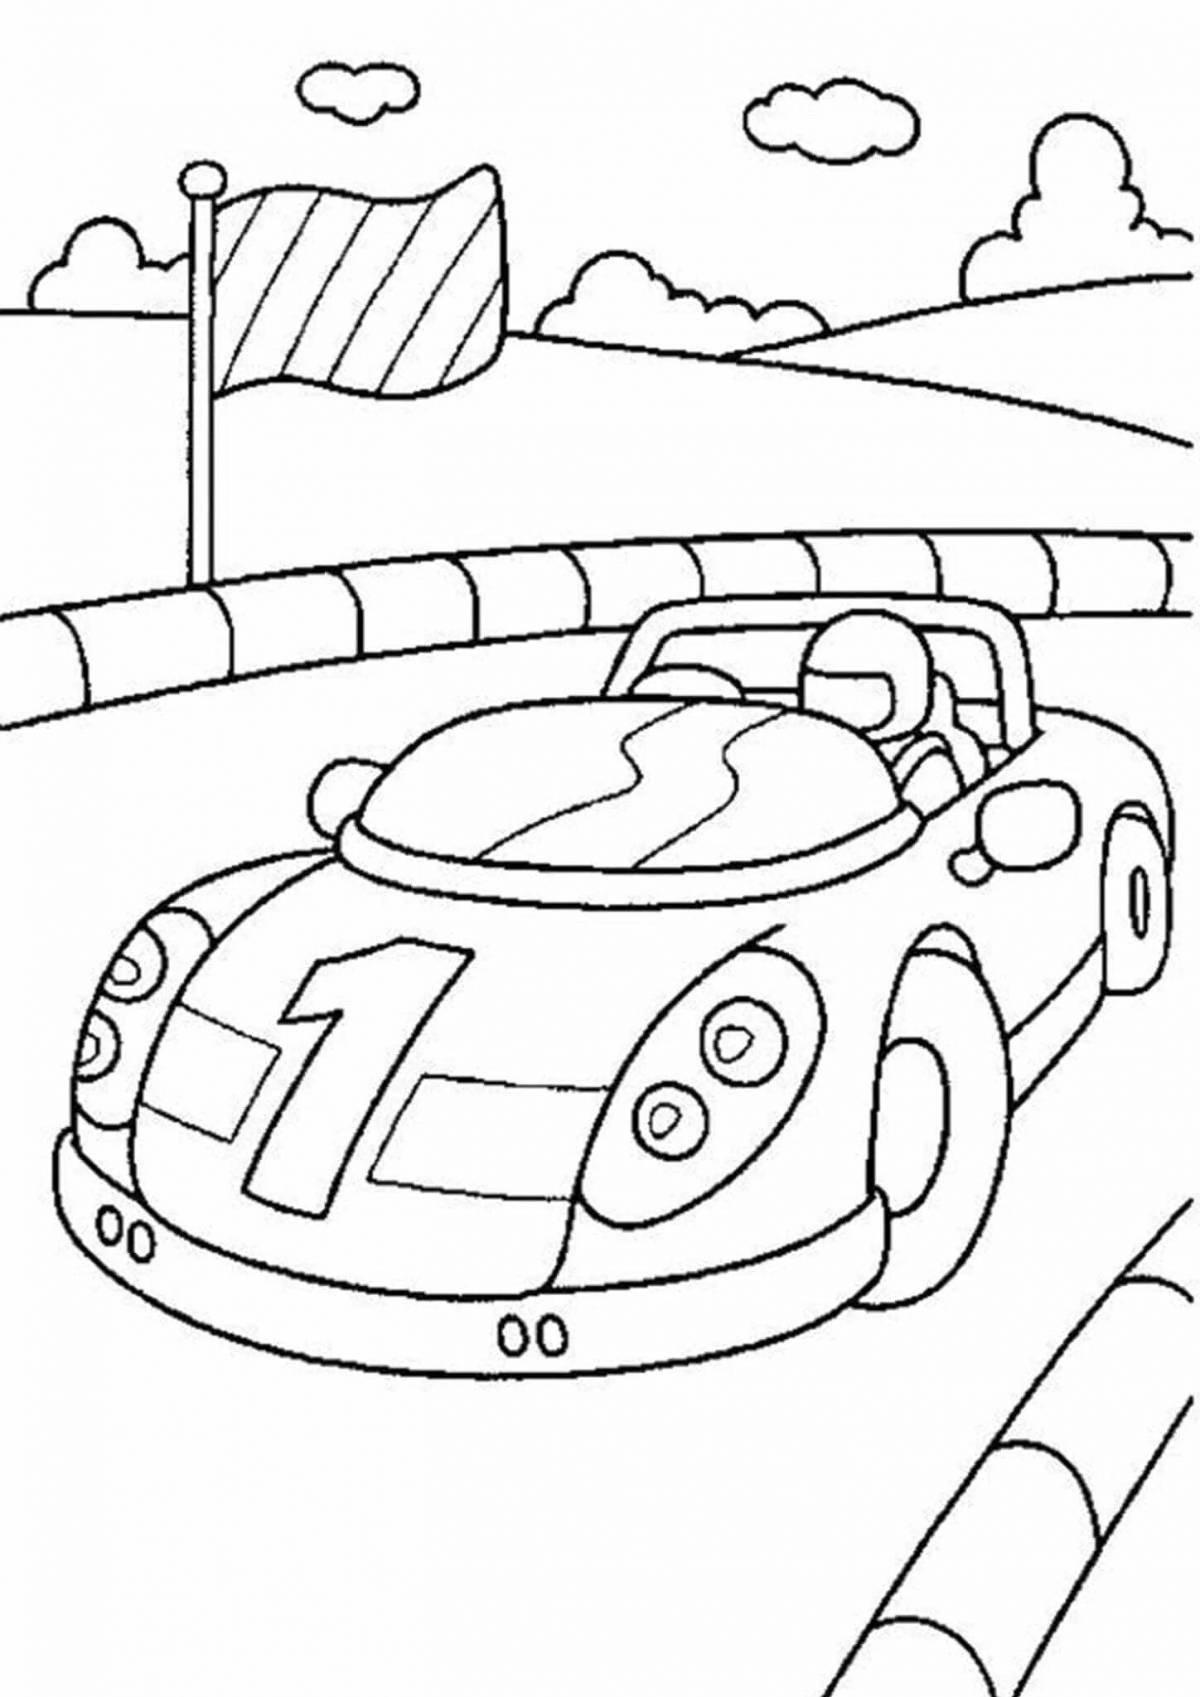 Coloring cars for boys 5-6 years old